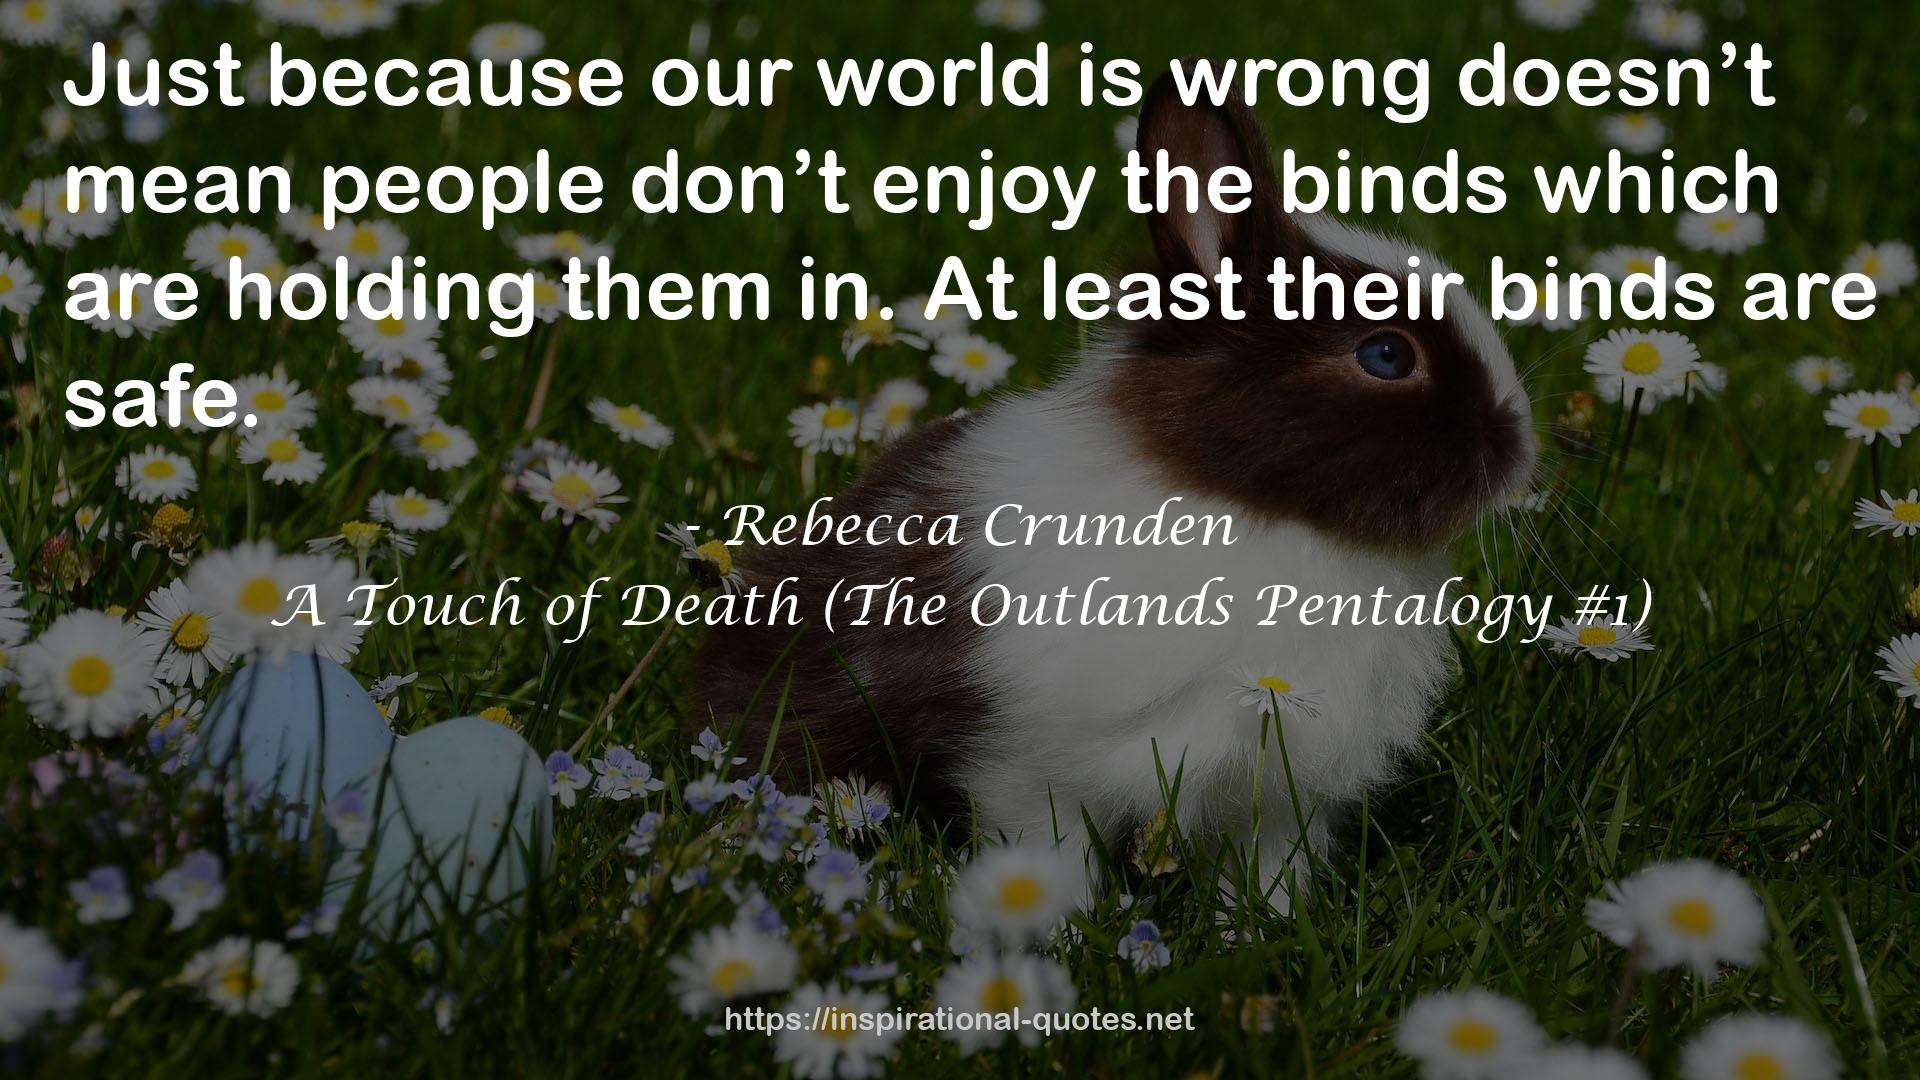 A Touch of Death (The Outlands Pentalogy #1) QUOTES